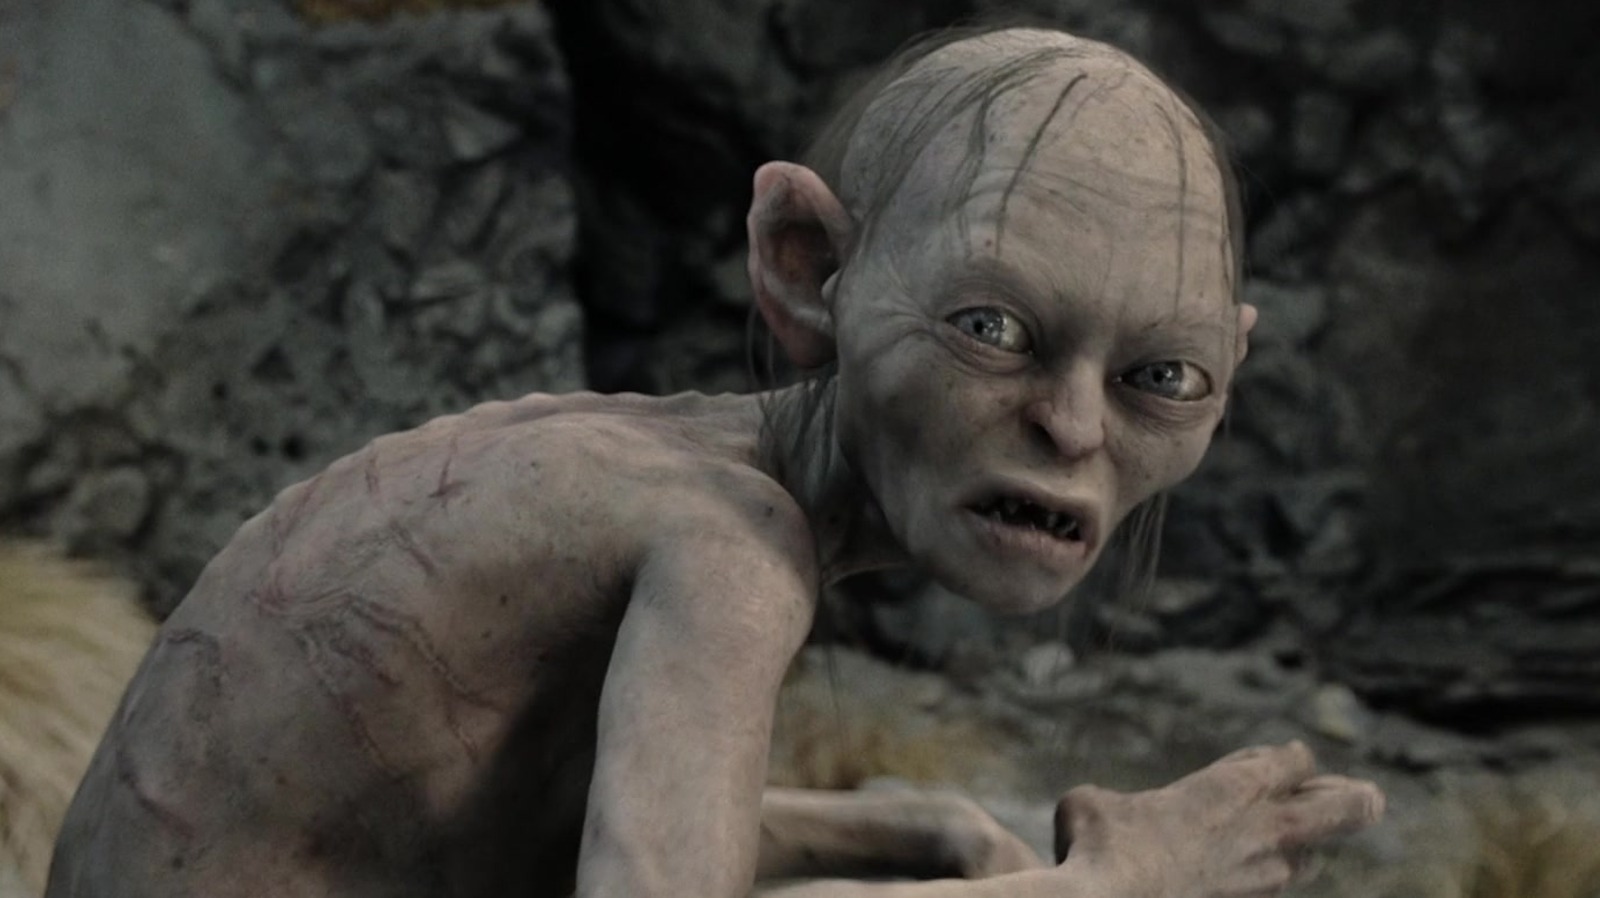 You wouldn't catch me dead doing motion capture: Gollum Actor Andy Serkis  Was Humiliated For His Iconic Role in 'The Lord of the Rings' - FandomWire